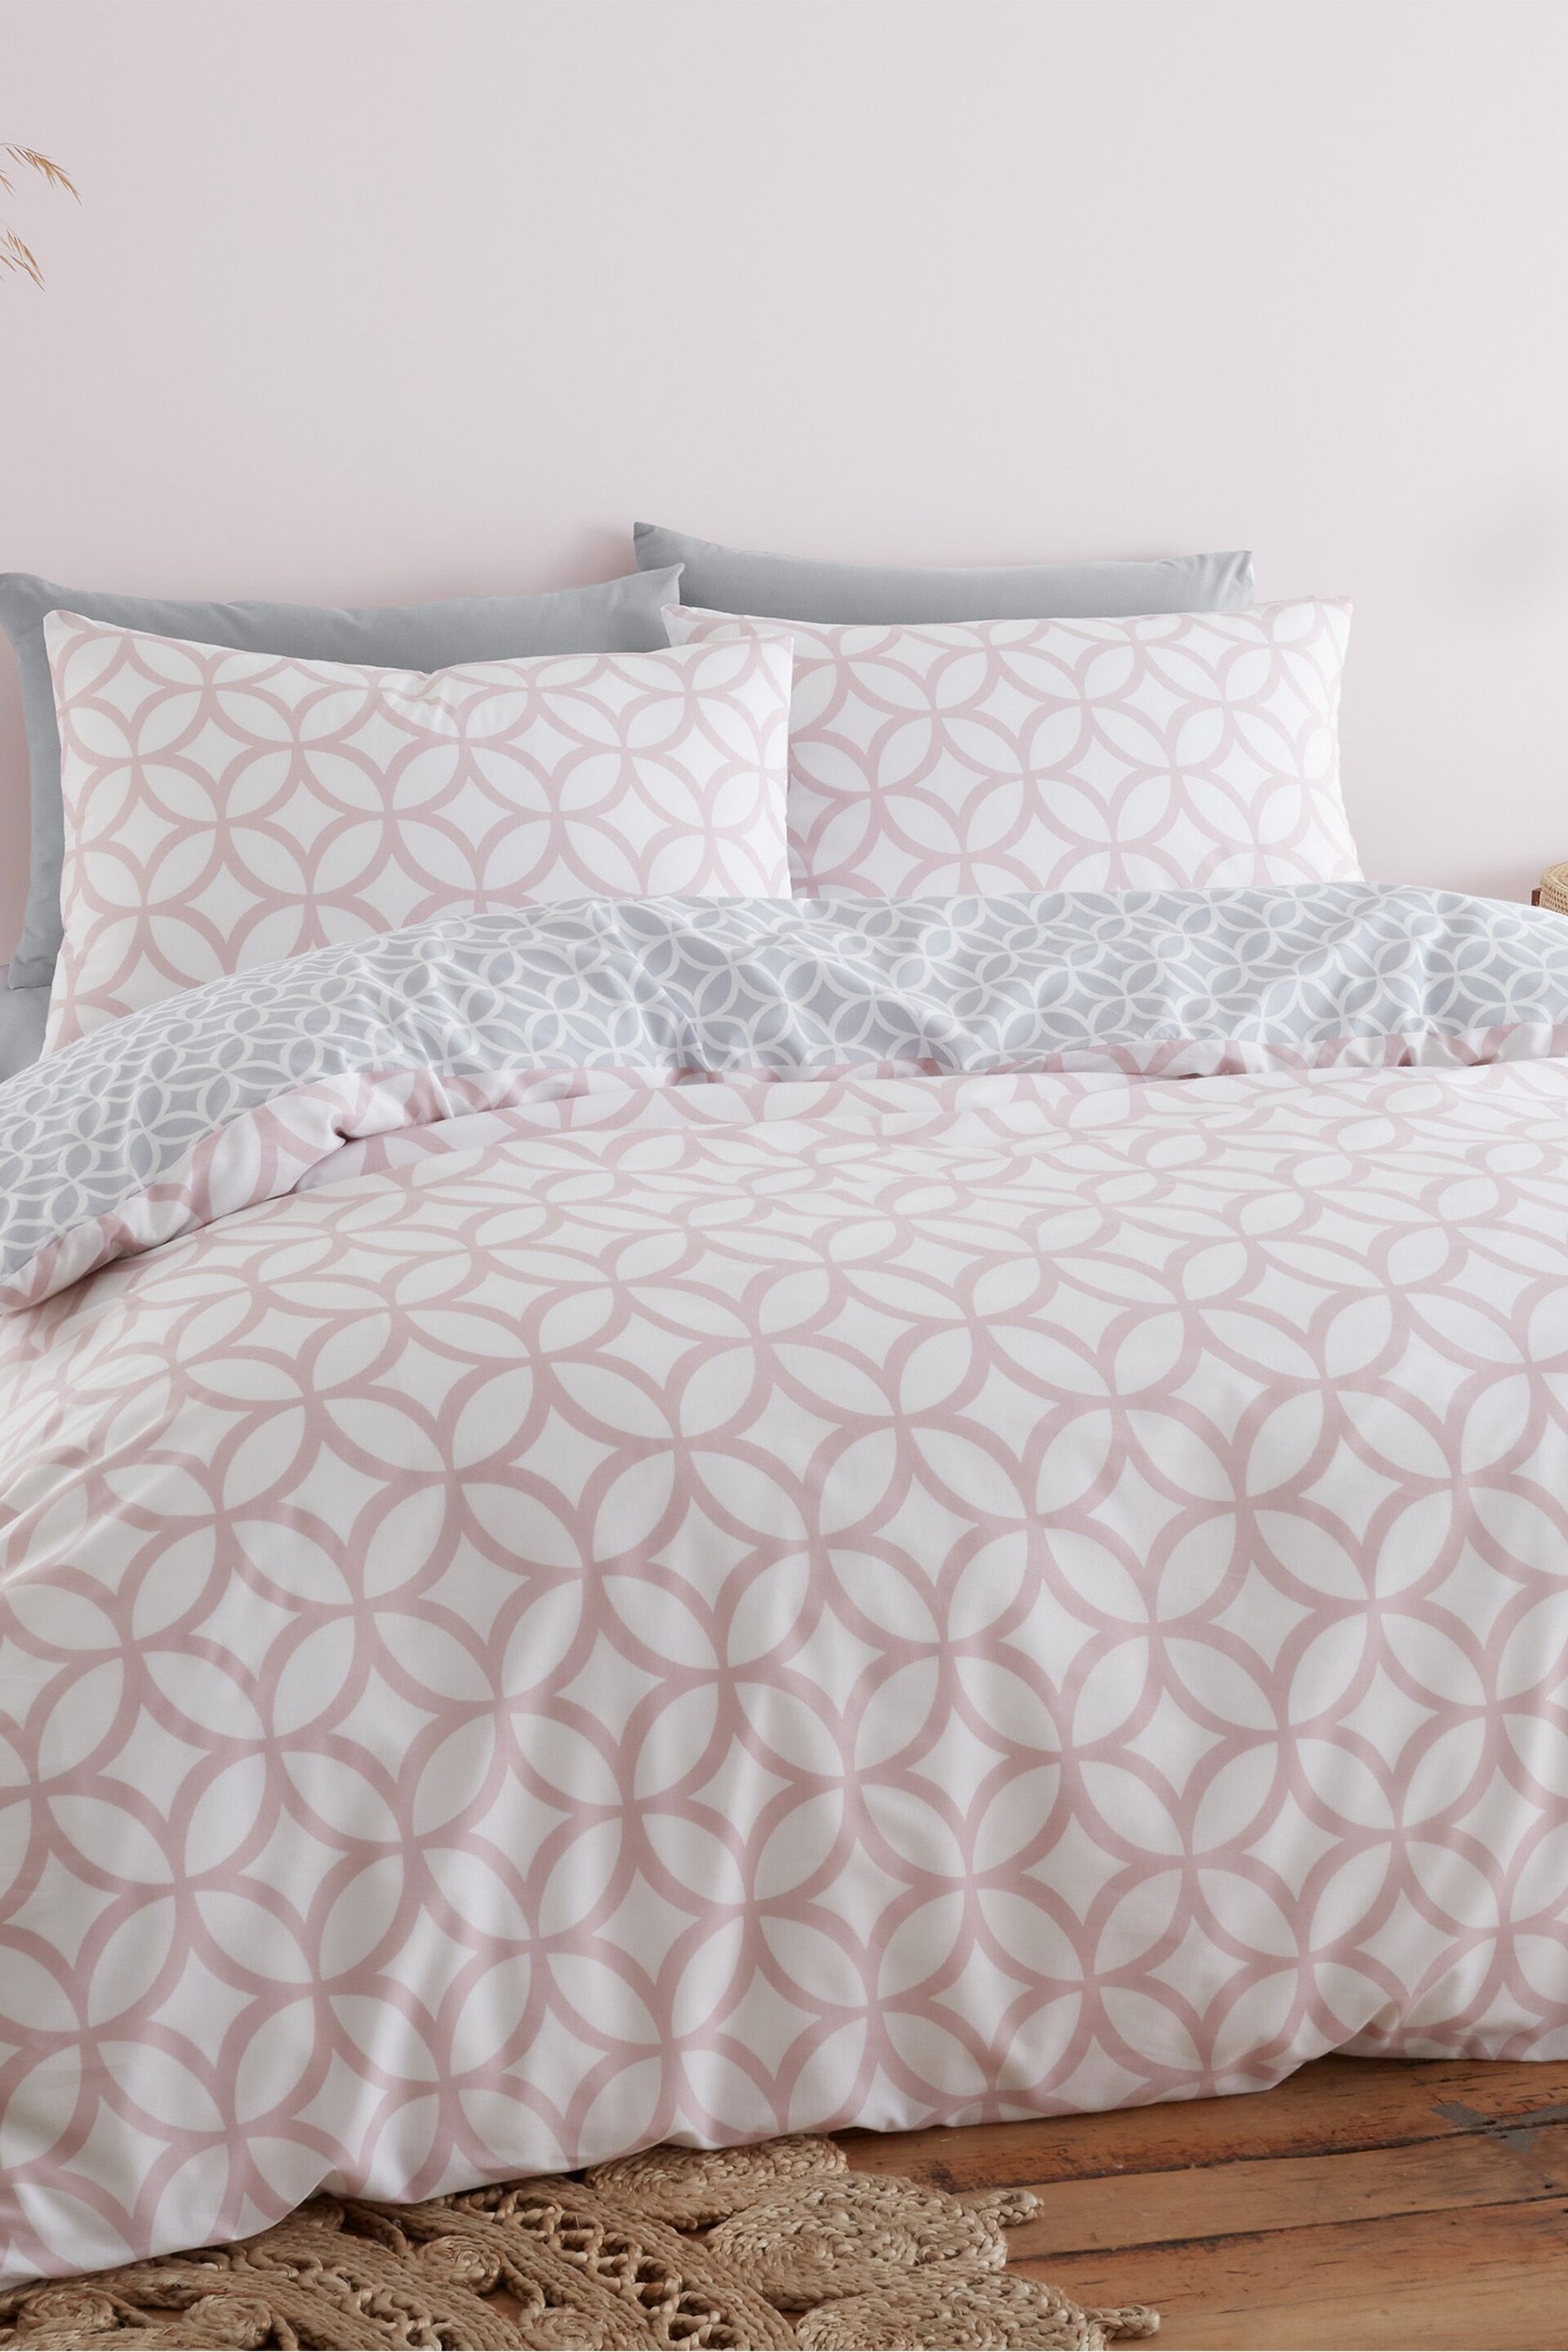 Catherine Lansfield Pink Geo Trellis Reversible Duvet Cover and Pillowcase Set - Image 1 of 4